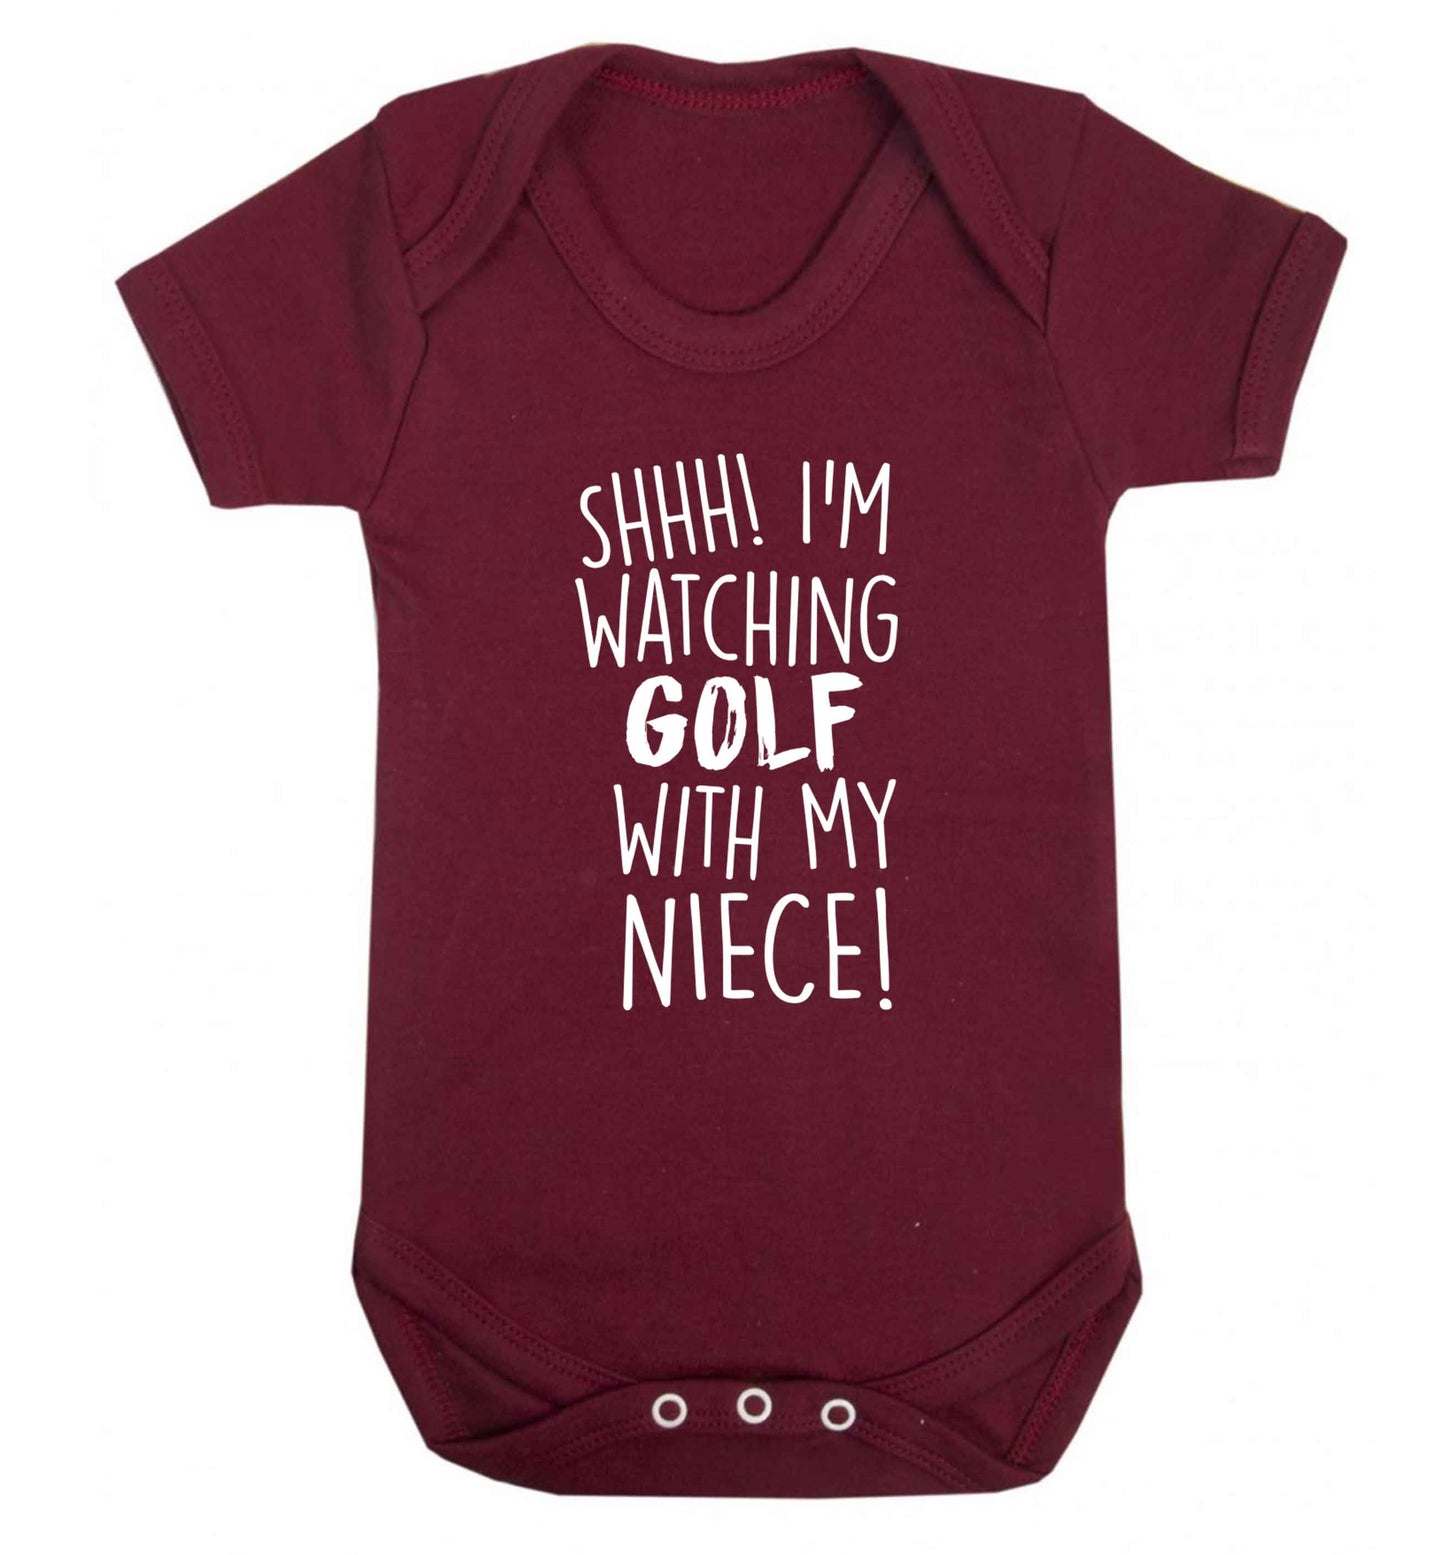 Shh I'm watching golf with my niece Baby Vest maroon 18-24 months